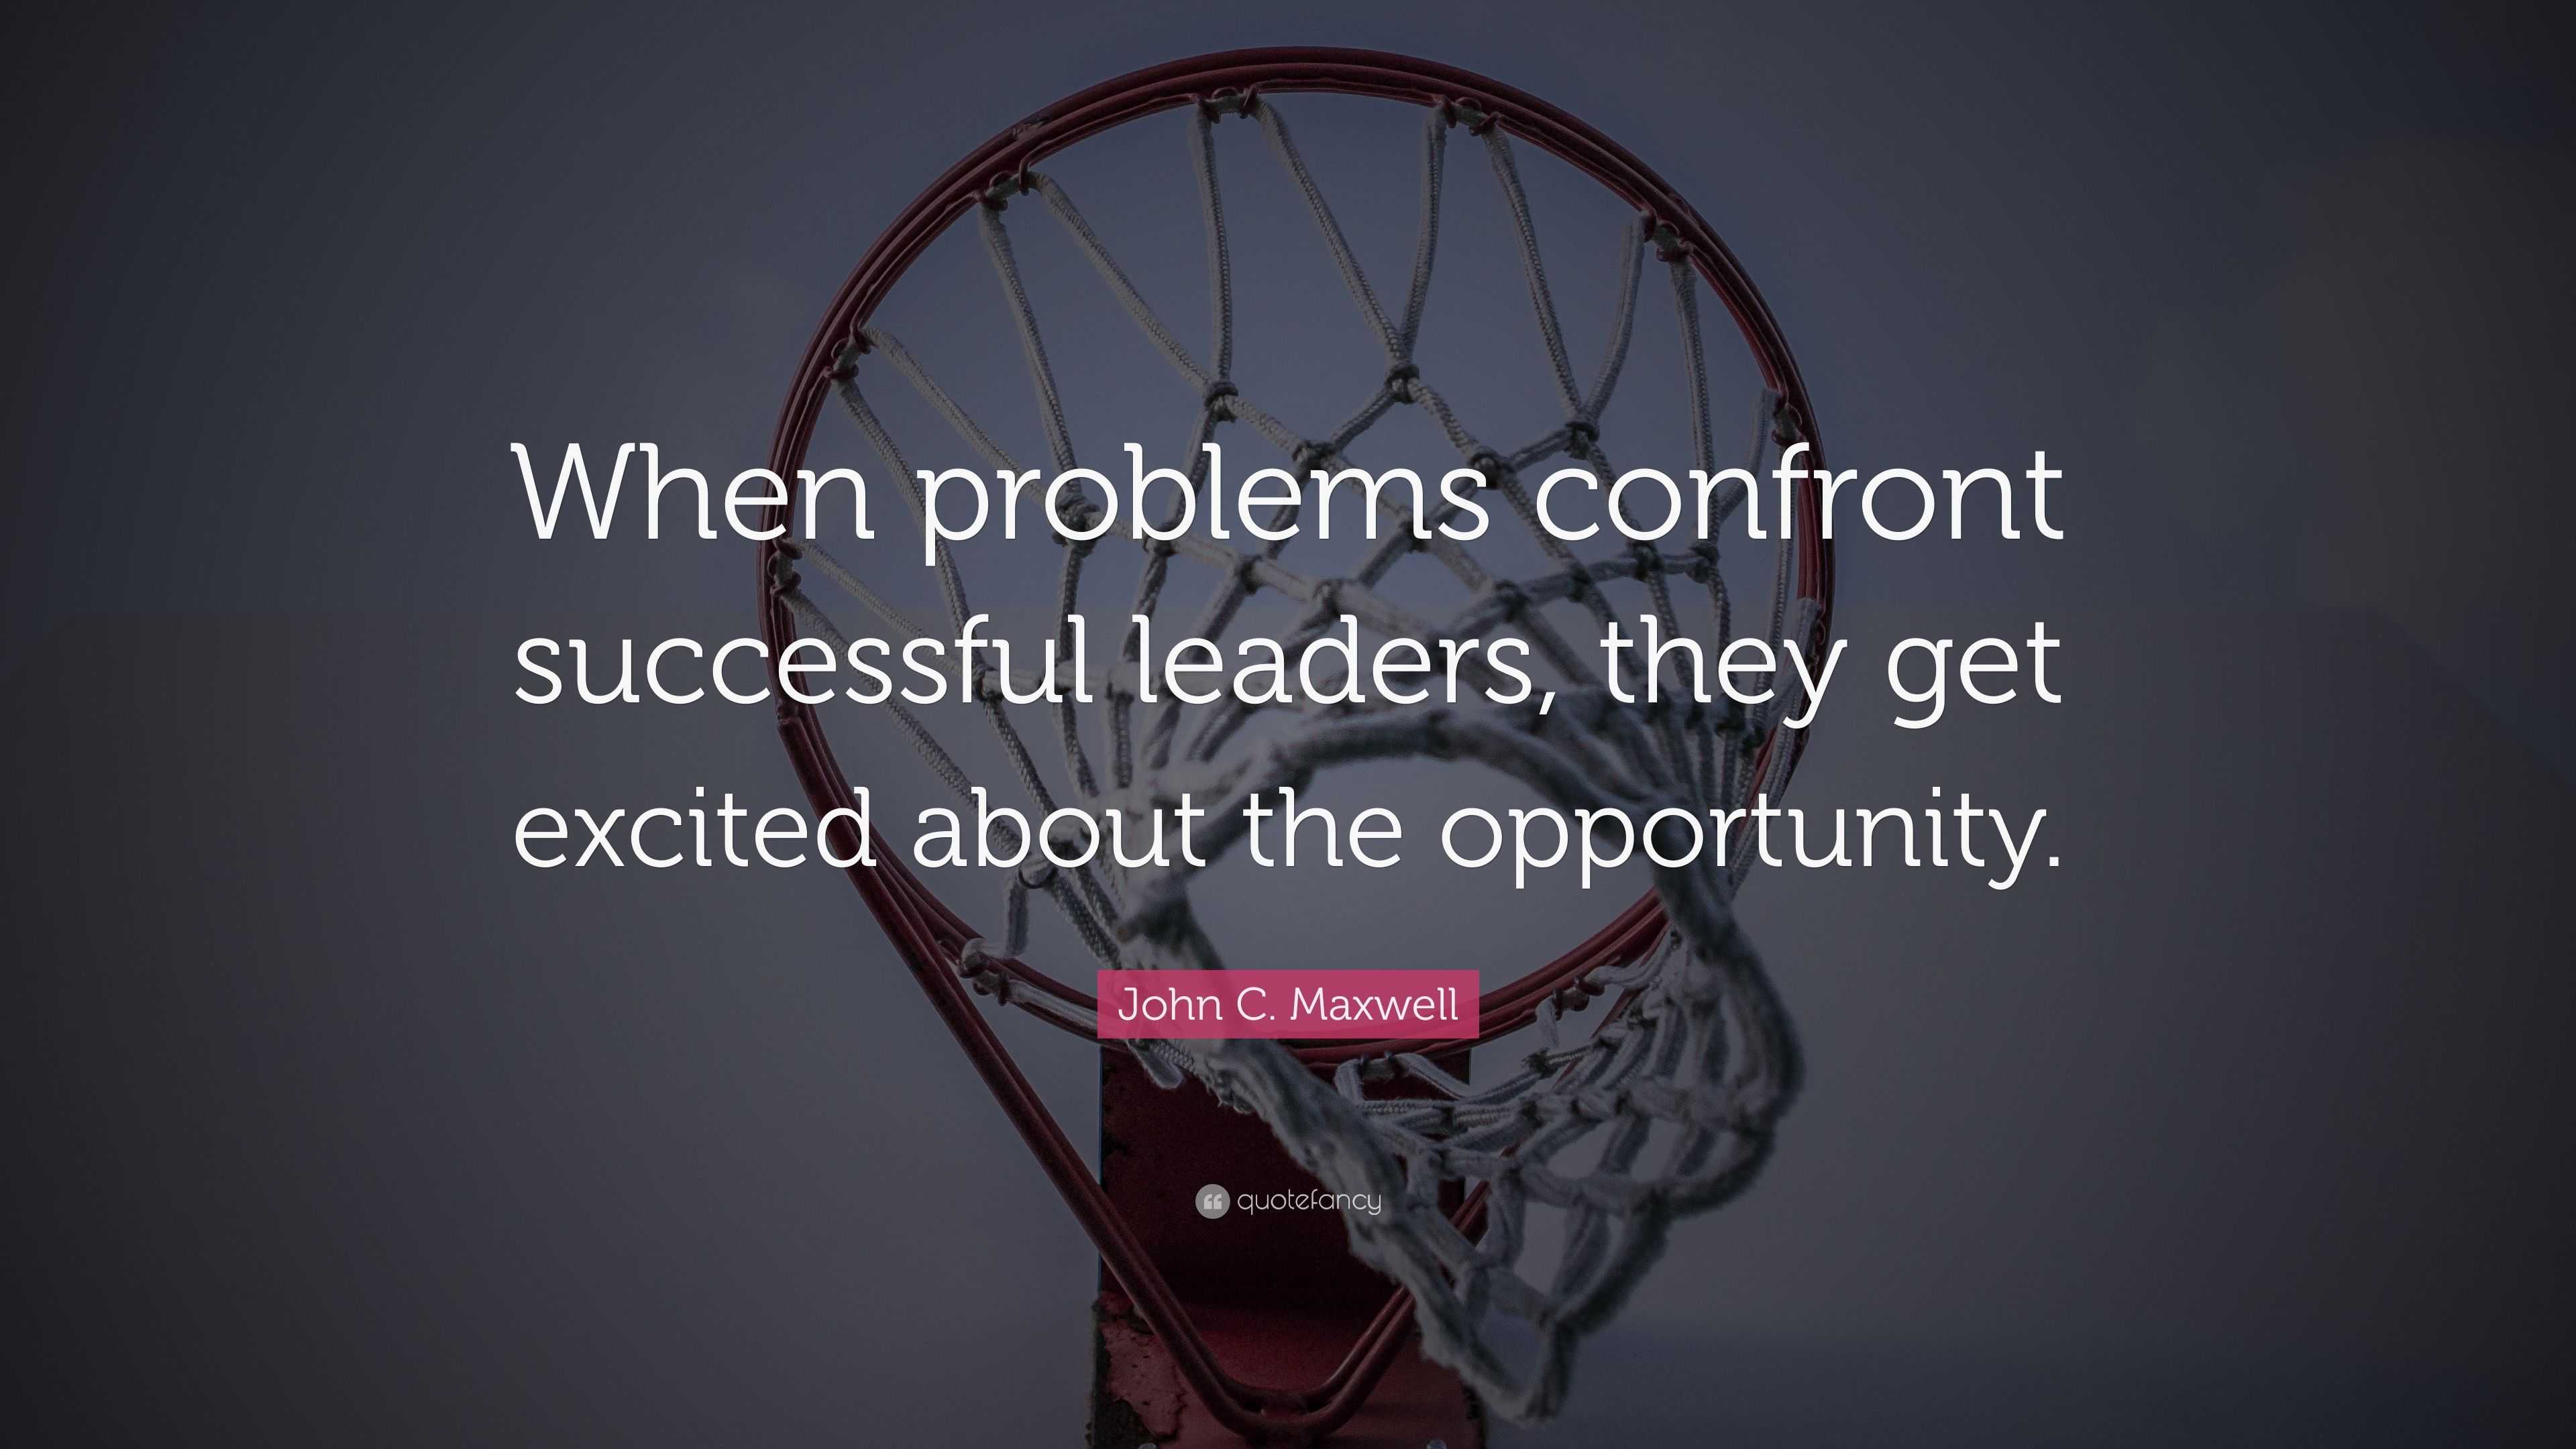 John C. Maxwell Quote: “When problems confront successful leaders, they ...